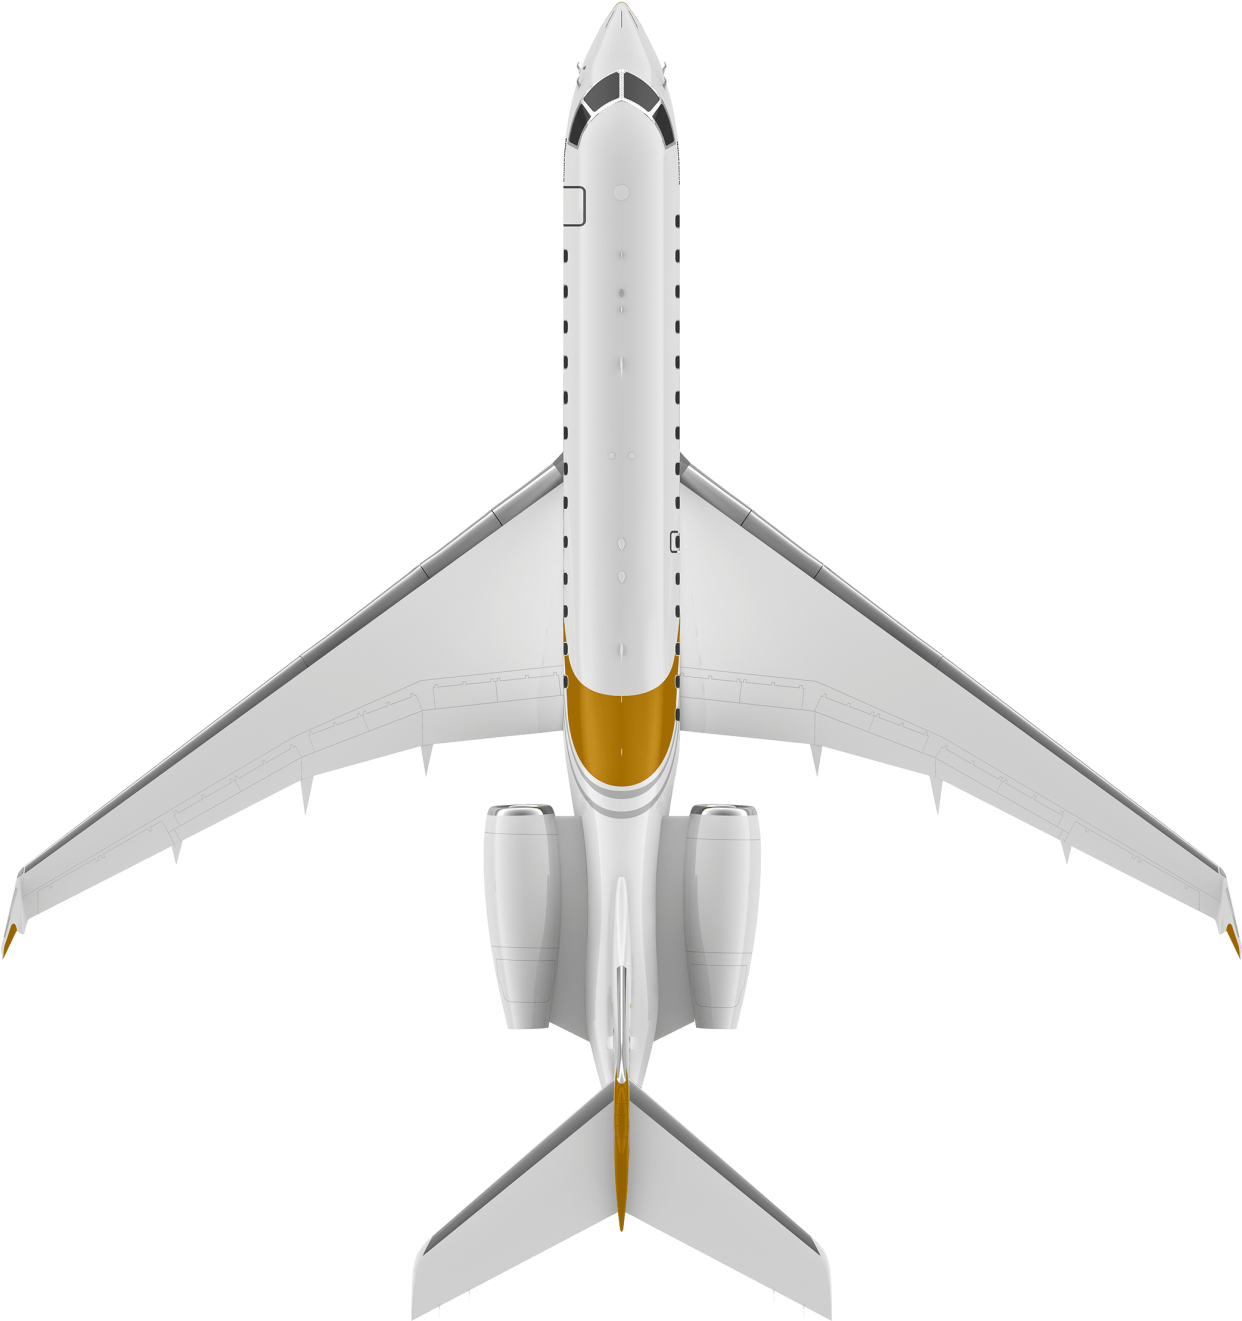 Global 6000 Top View - Private Jet Top View (1430x1430)